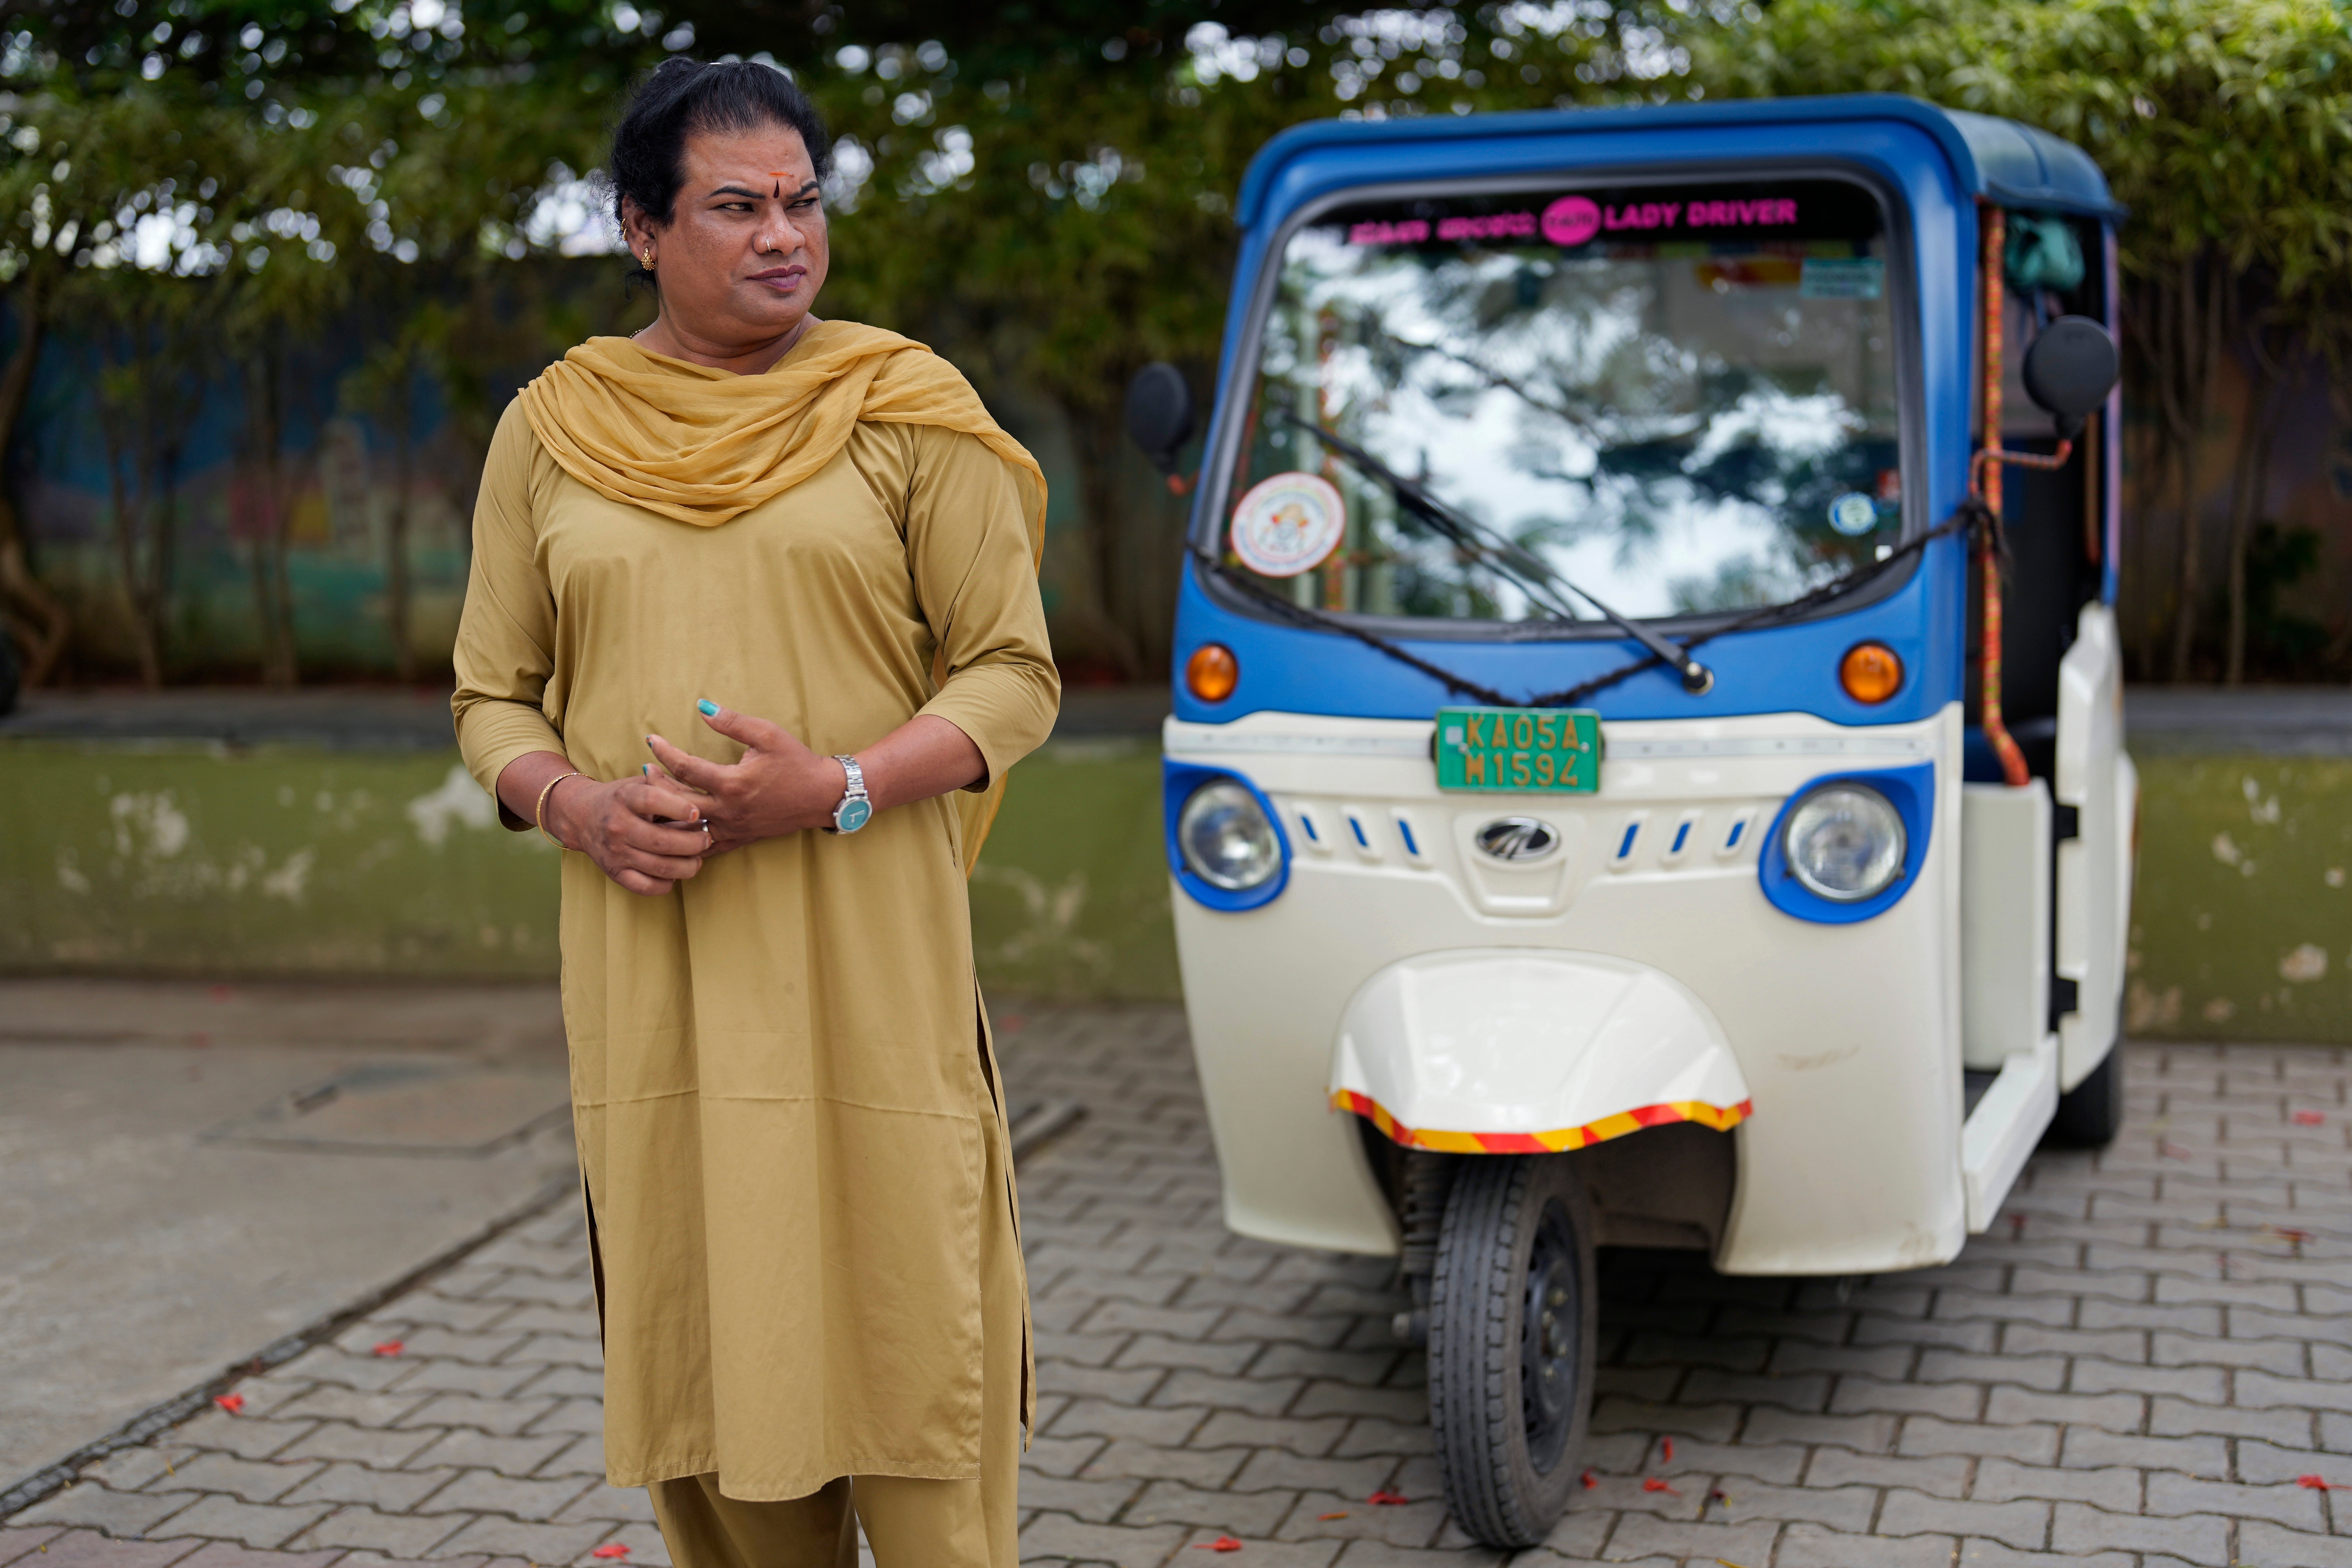 If you hail a rickshaw in the Indian city of Bengaluru, your driver might just be a 38-year-old transgender woman named Preethi